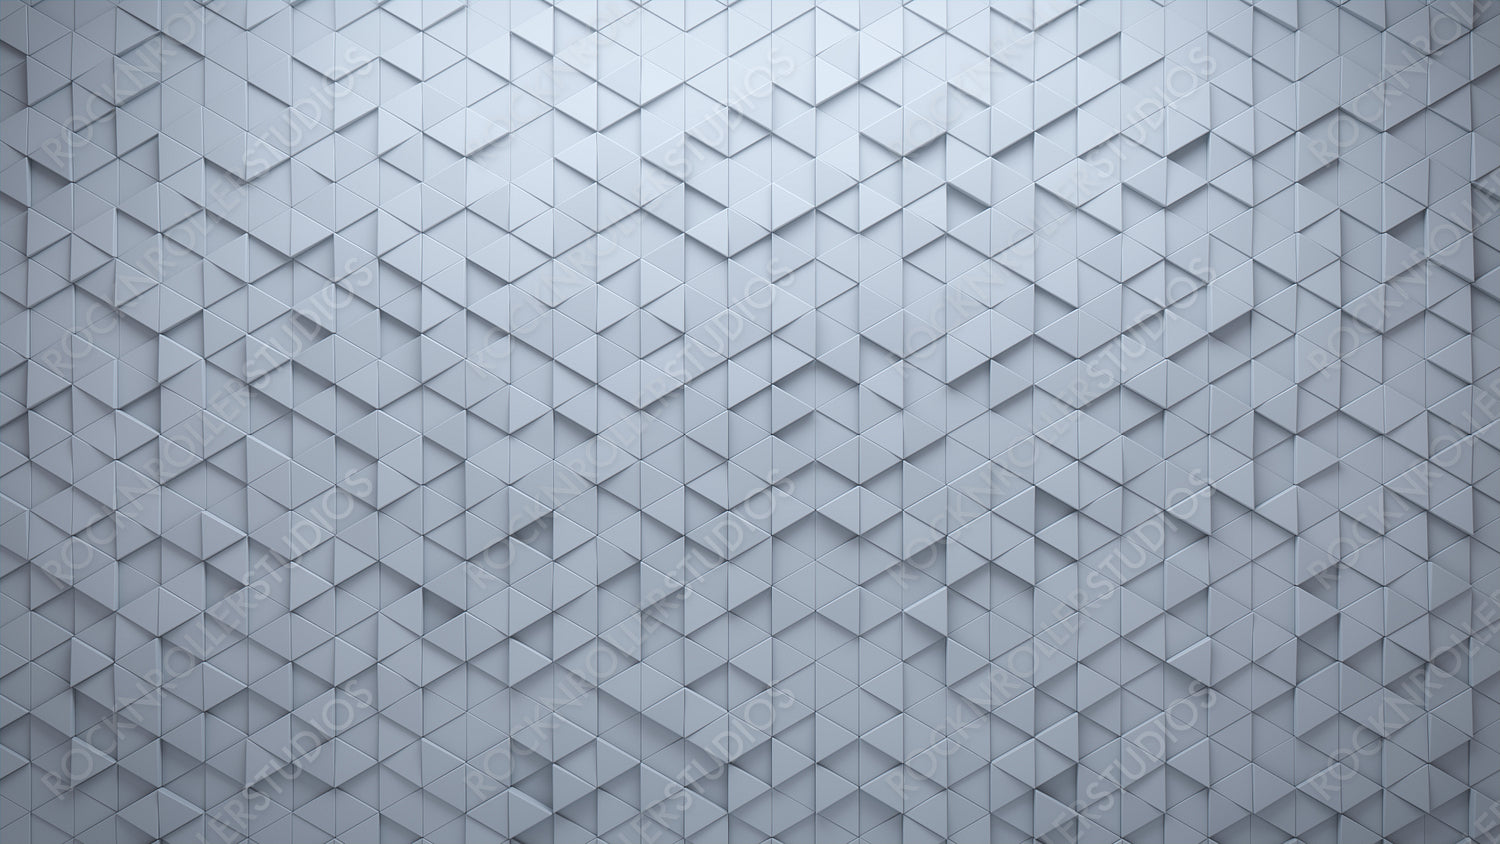 3D, White Mosaic Tiles arranged in the shape of a wall. Polished, Semigloss, Bricks stacked to create a Triangular block background. 3D Render